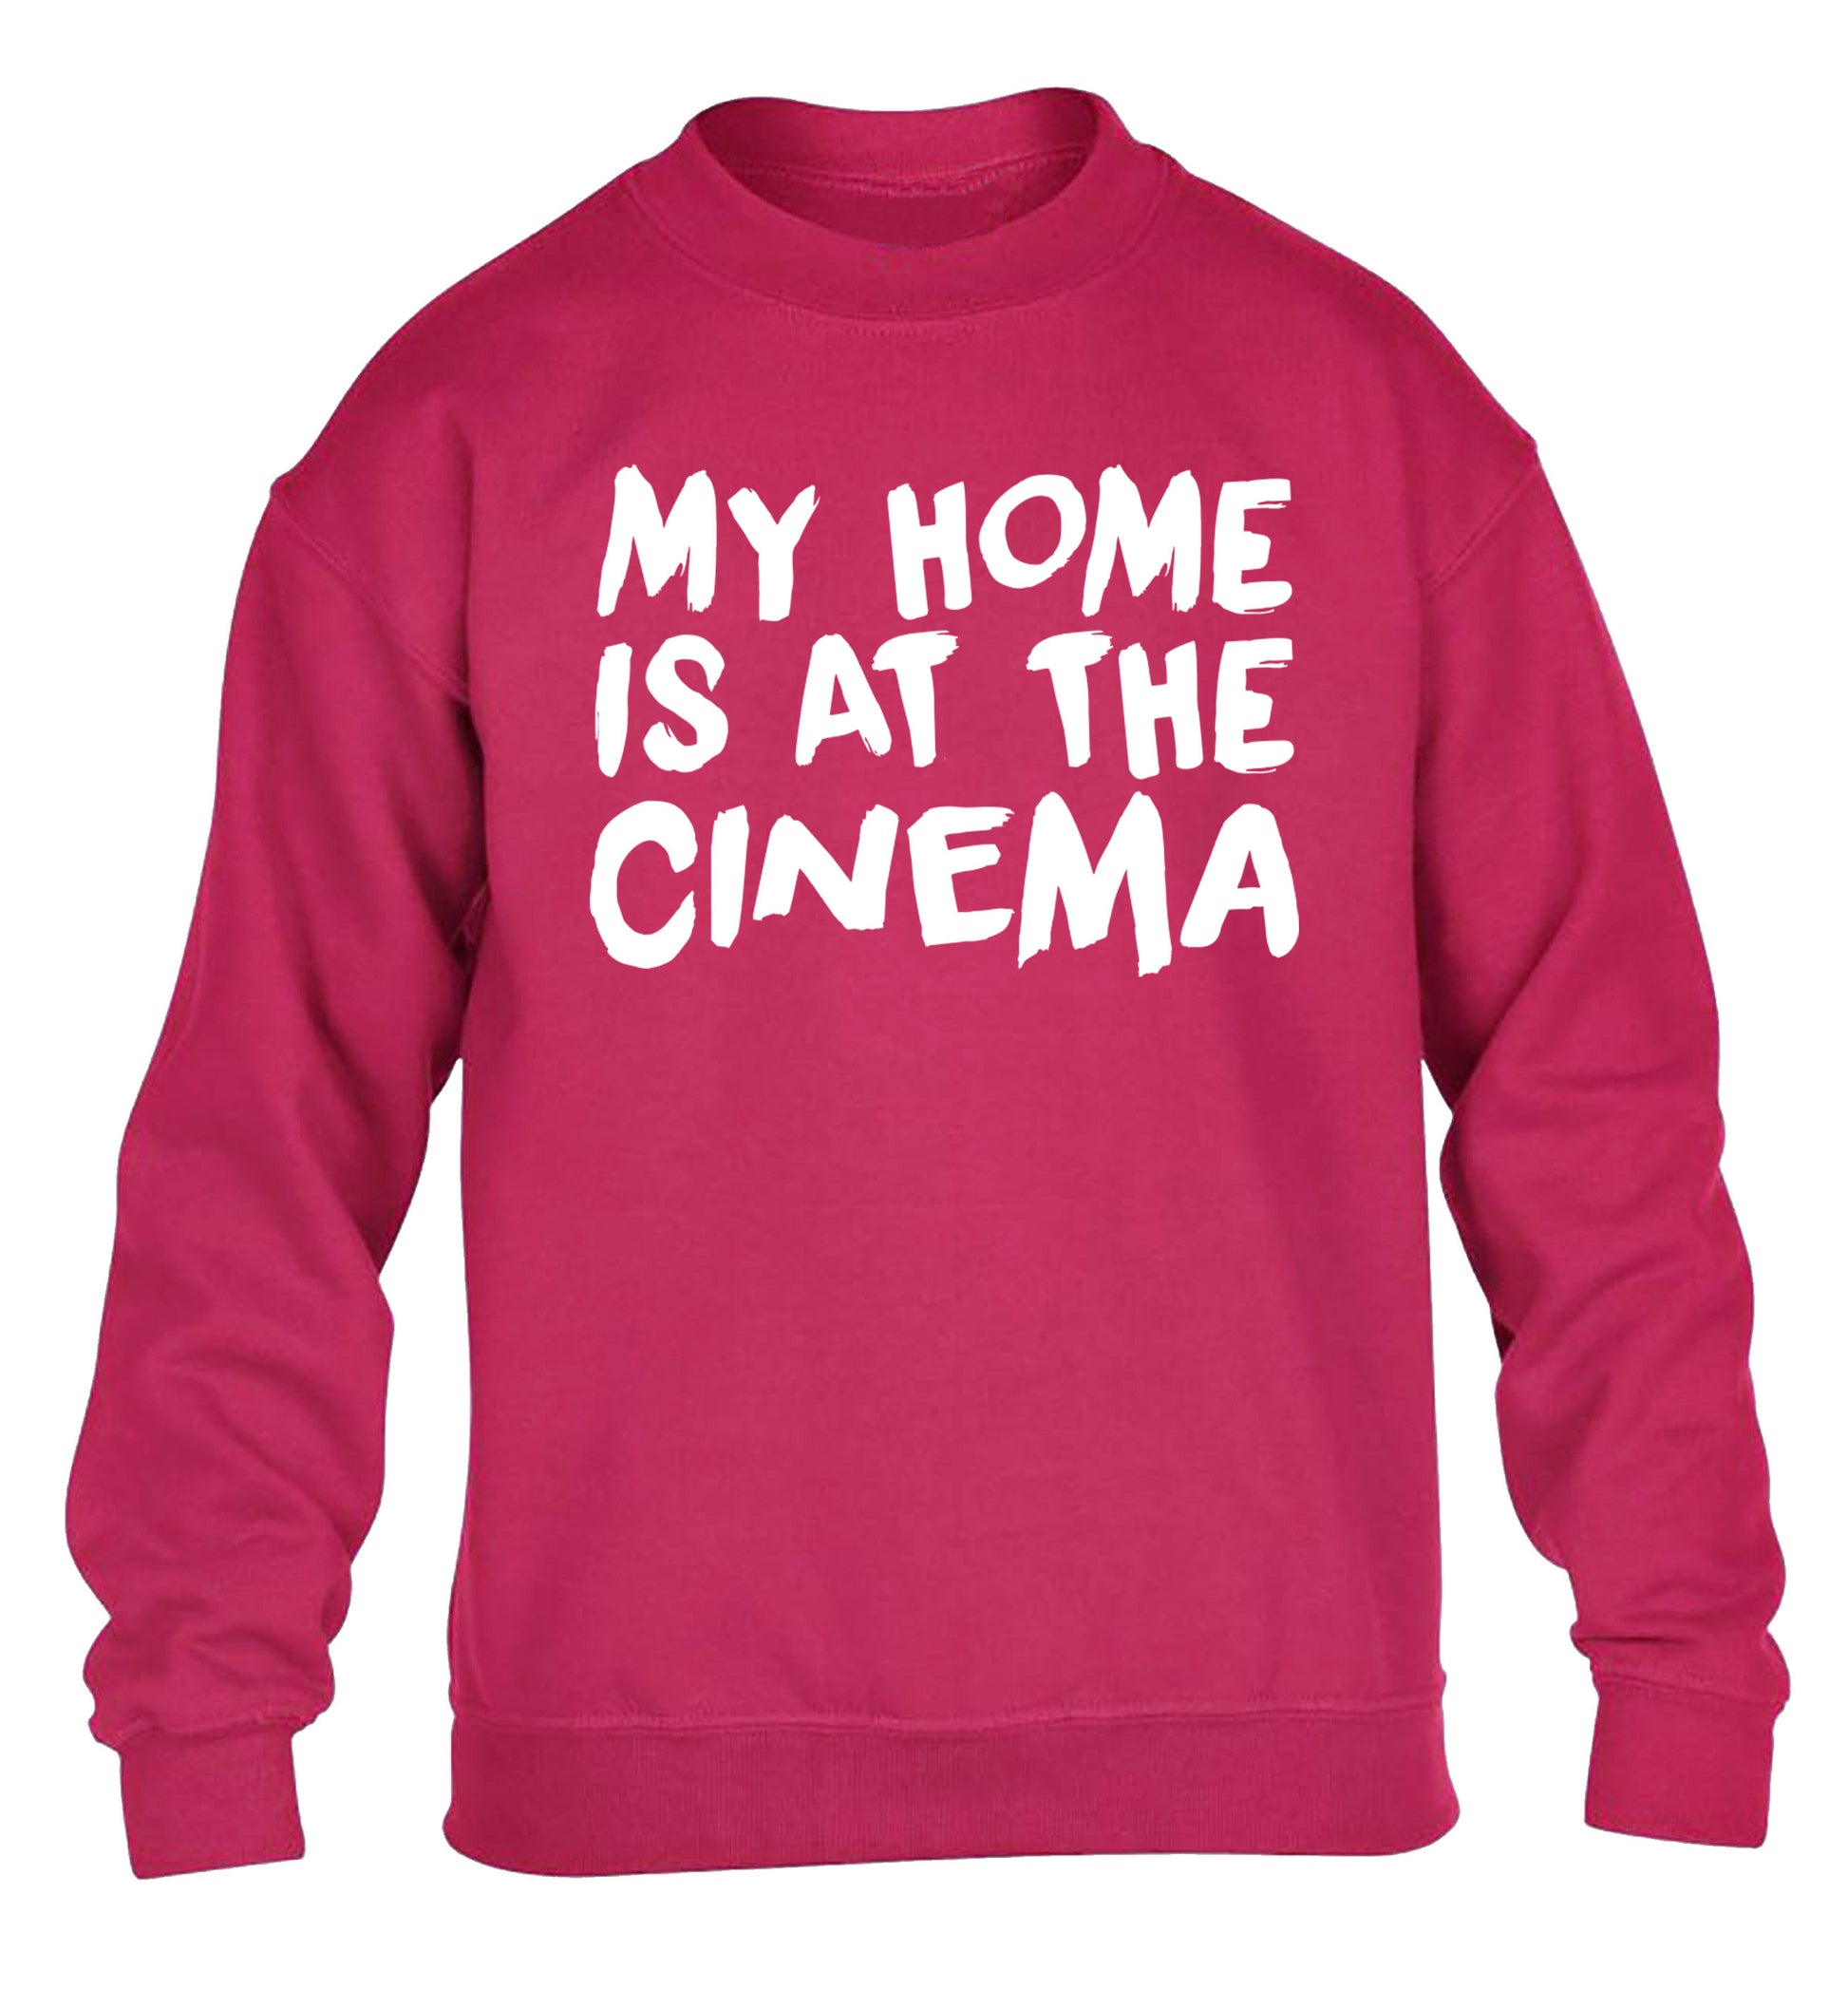 My home is at the cinema children's pink sweater 12-14 Years